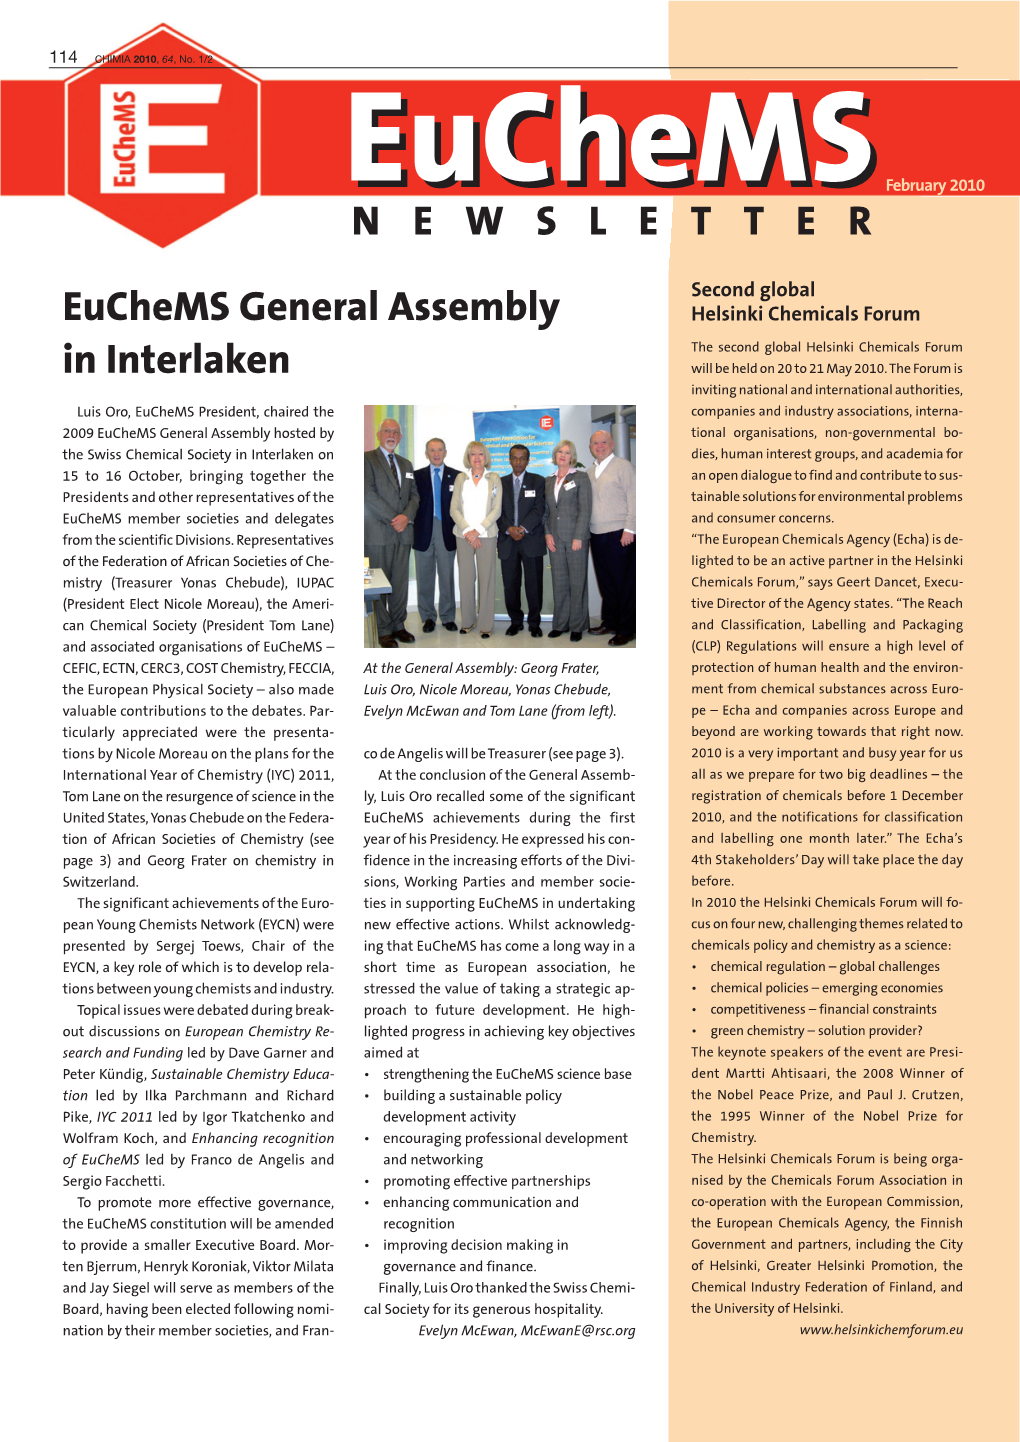 Euchems Newsletter with the Aim of Advancing the Chemical Sci- Spective Countries